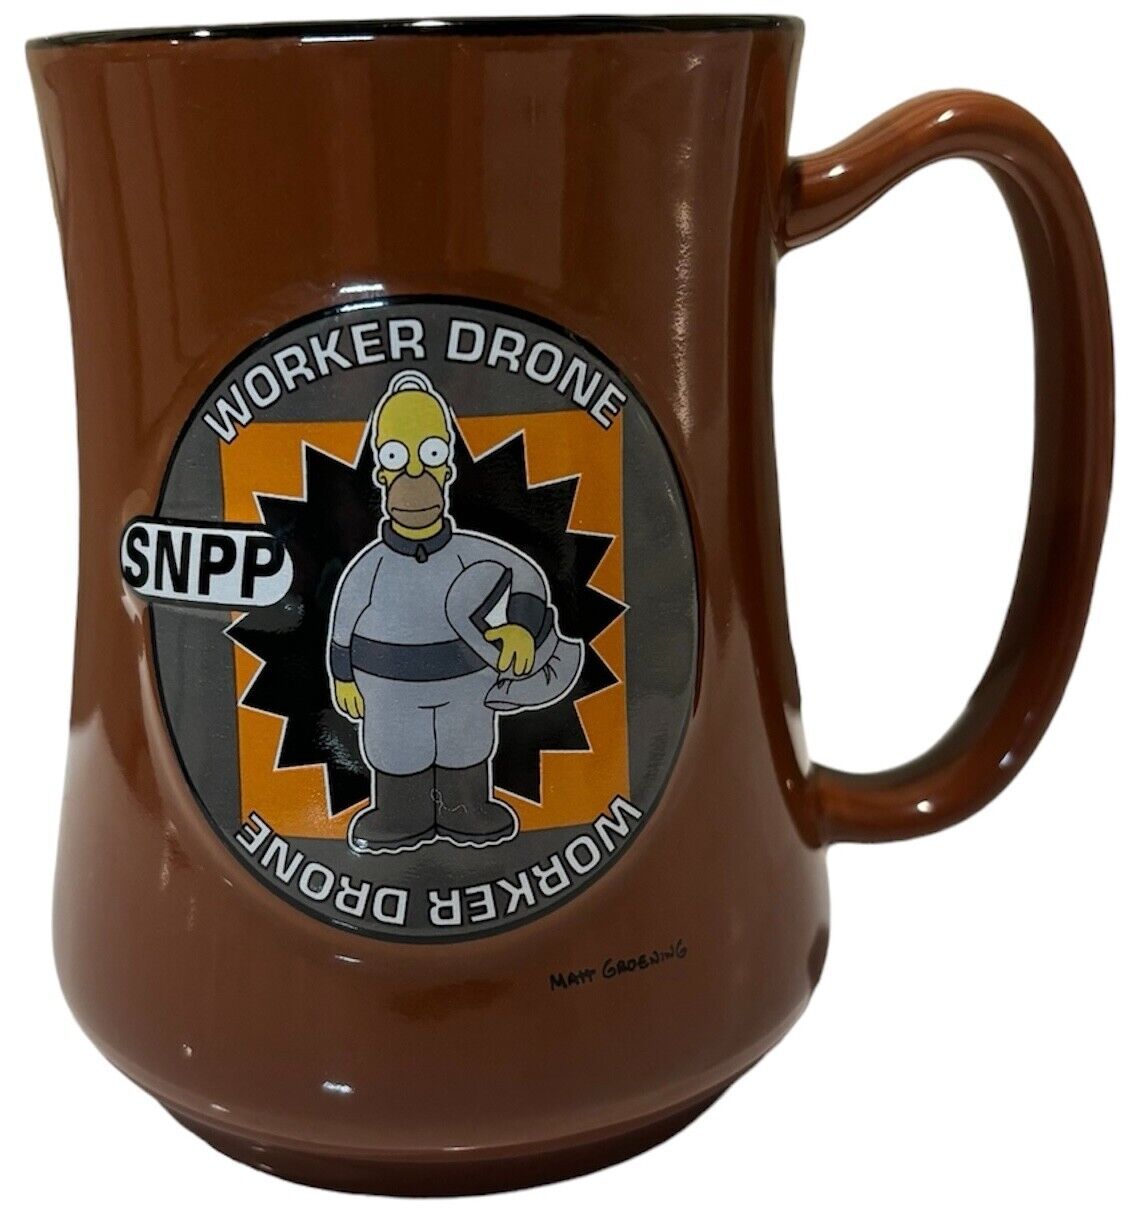 VTG HOMER SIMPSON THE SIMPSONS WORKER DRONE NUCLEAR POWER PLANT COFFEE MUG 2004